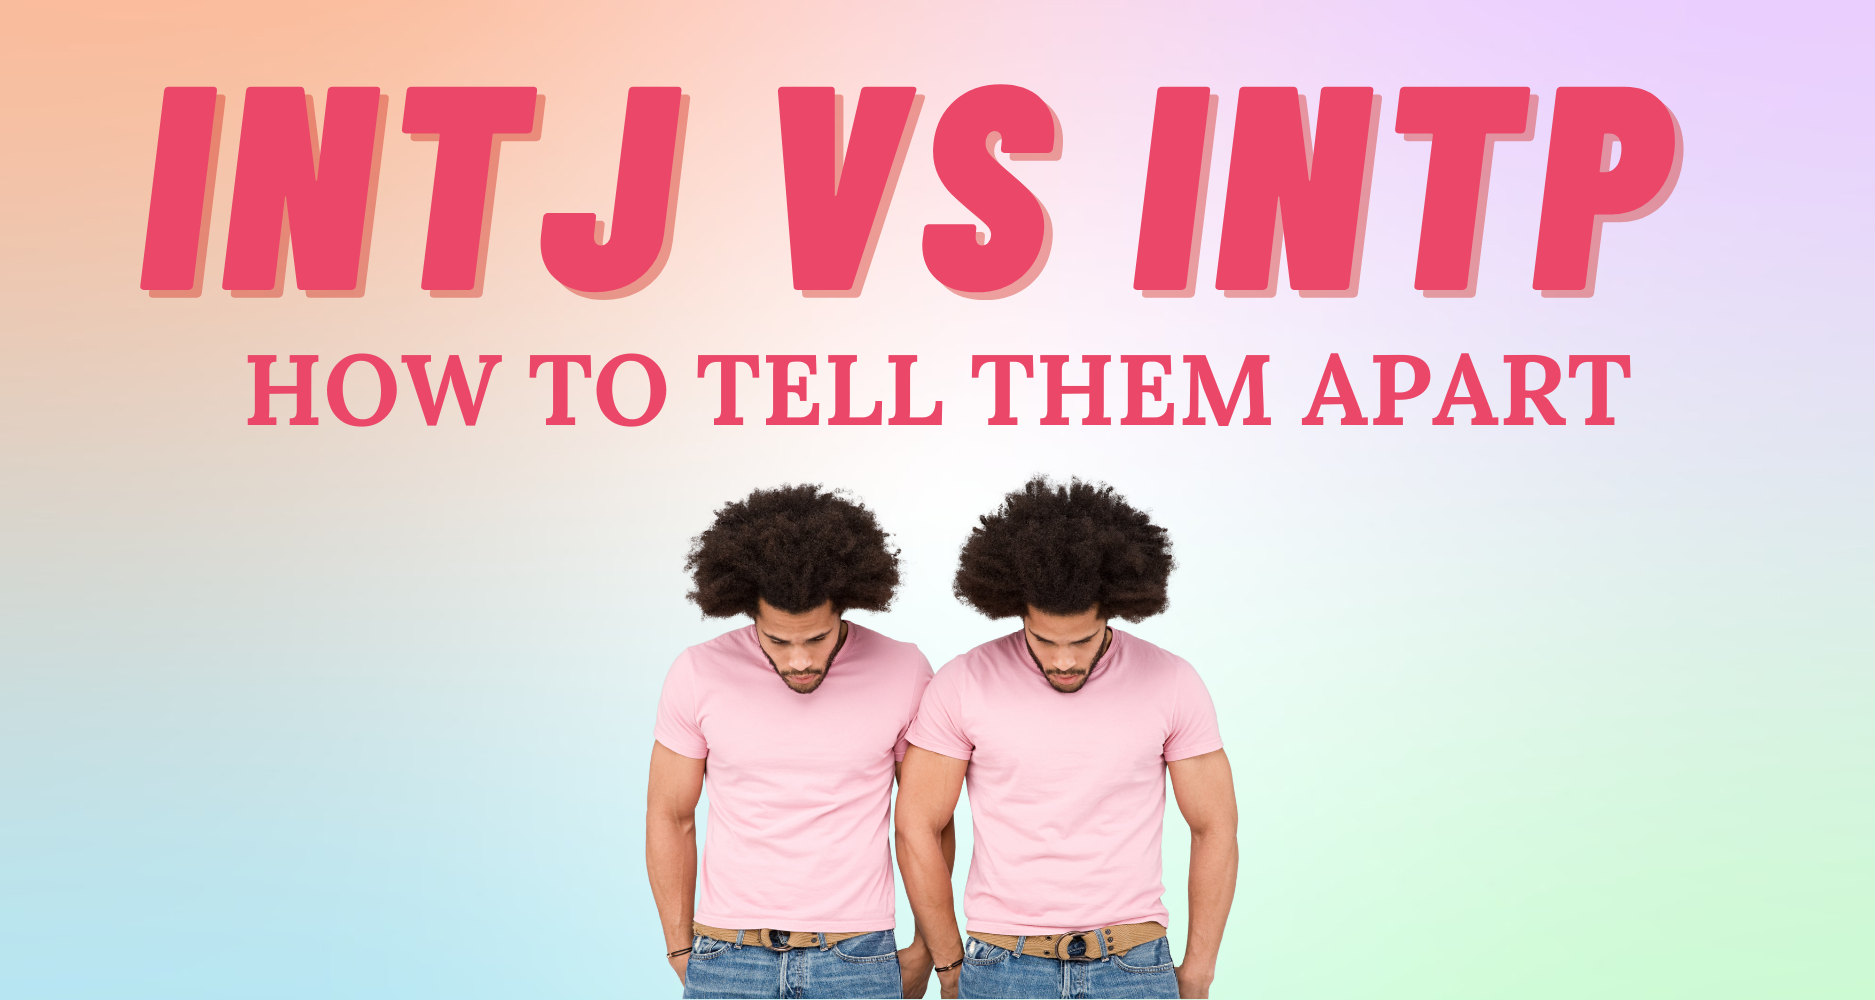 How to Spot an INTJ Compared to the Other Types